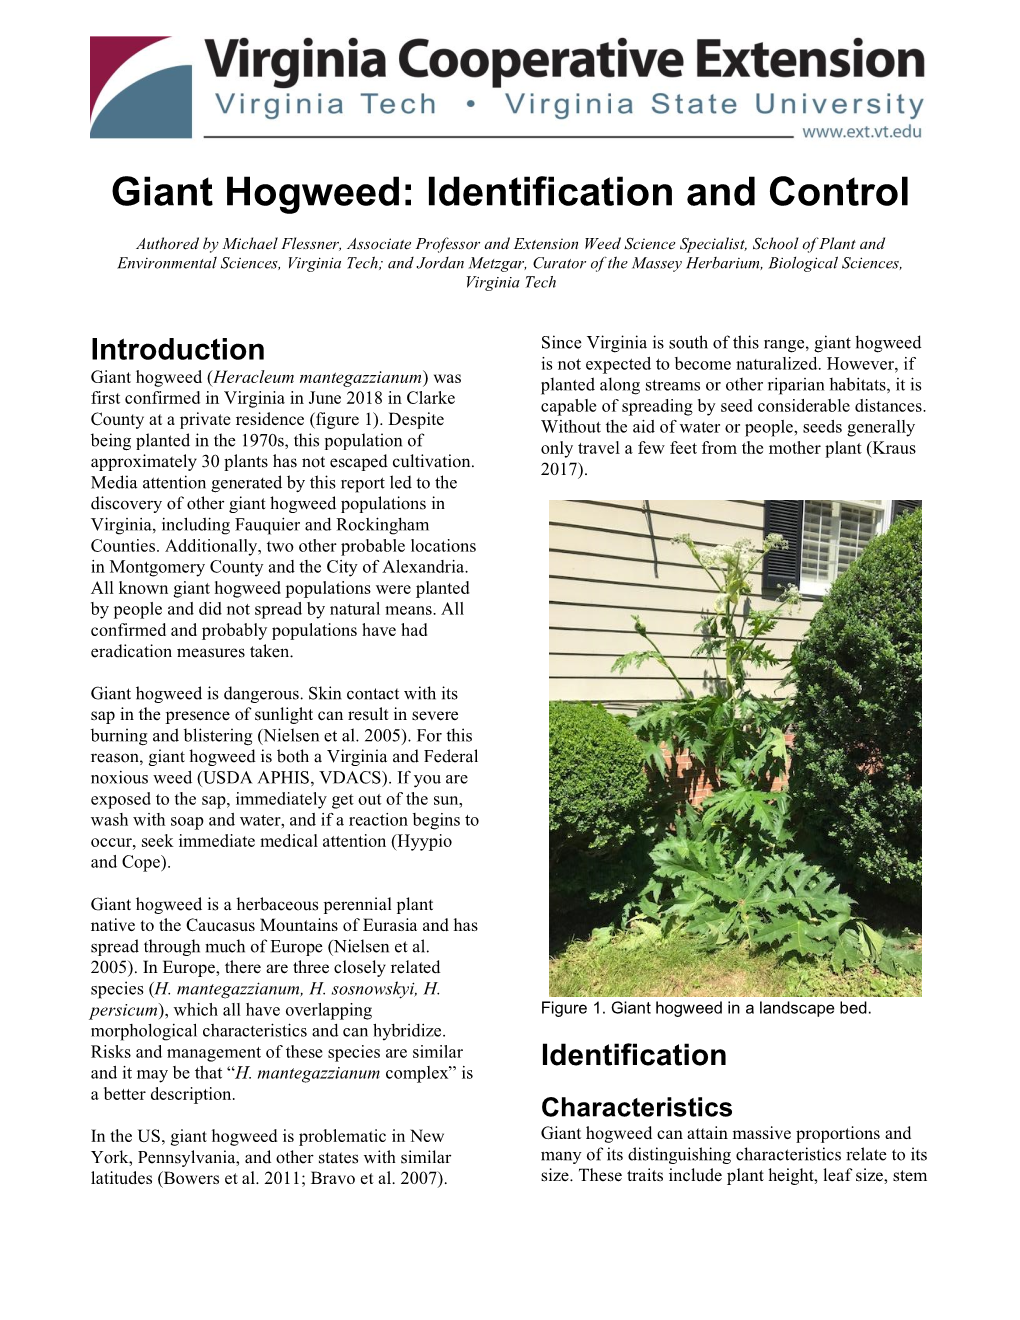 Giant Hogweed: Identification and Control